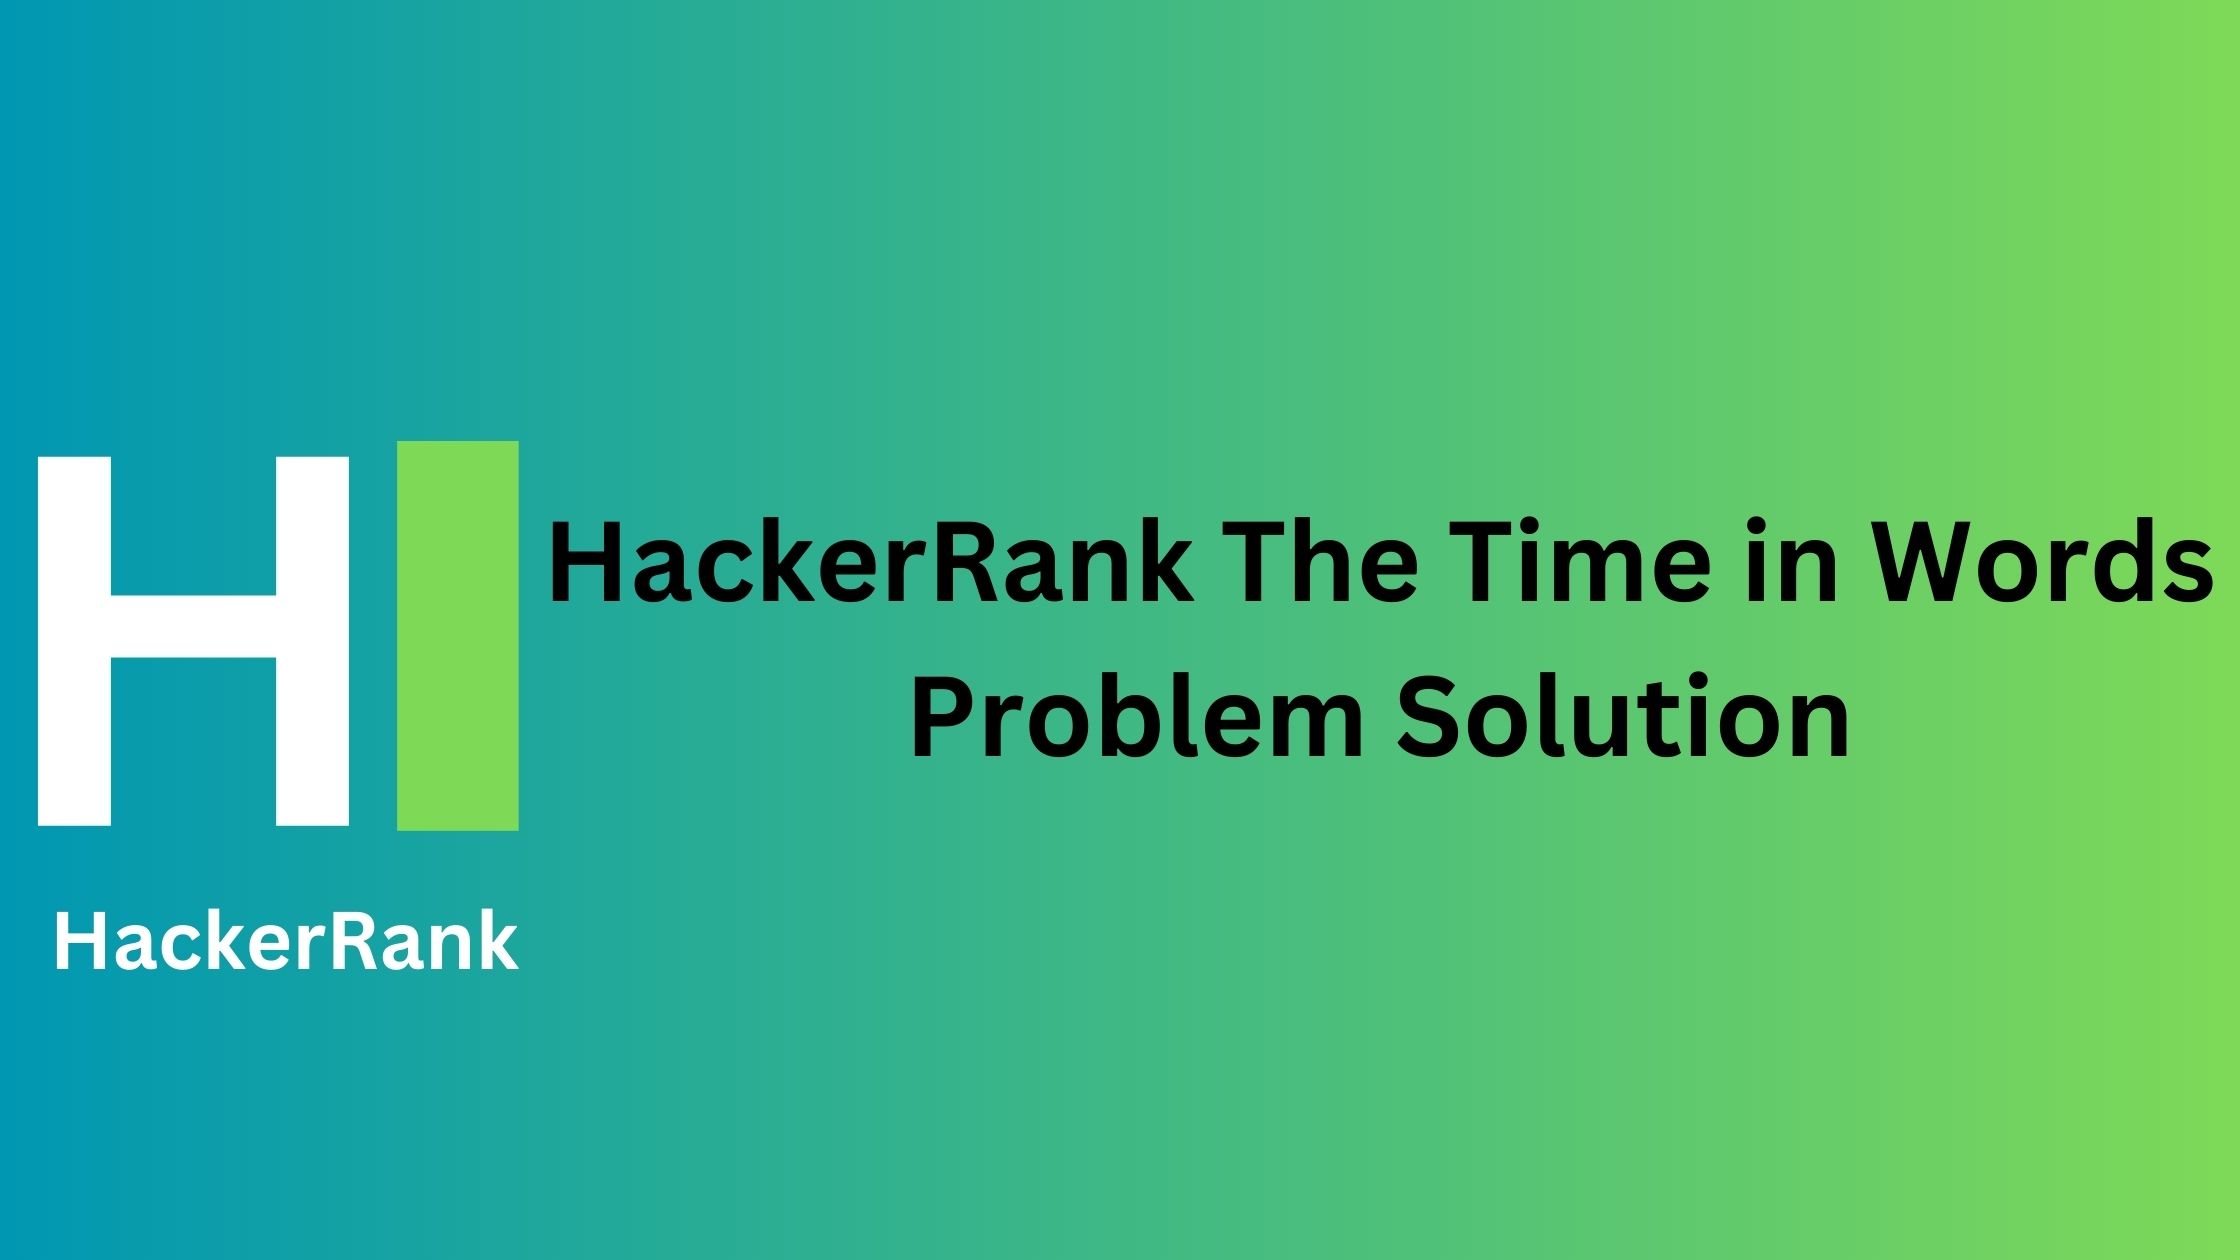 HackerRank The Time in Words Problem Solution